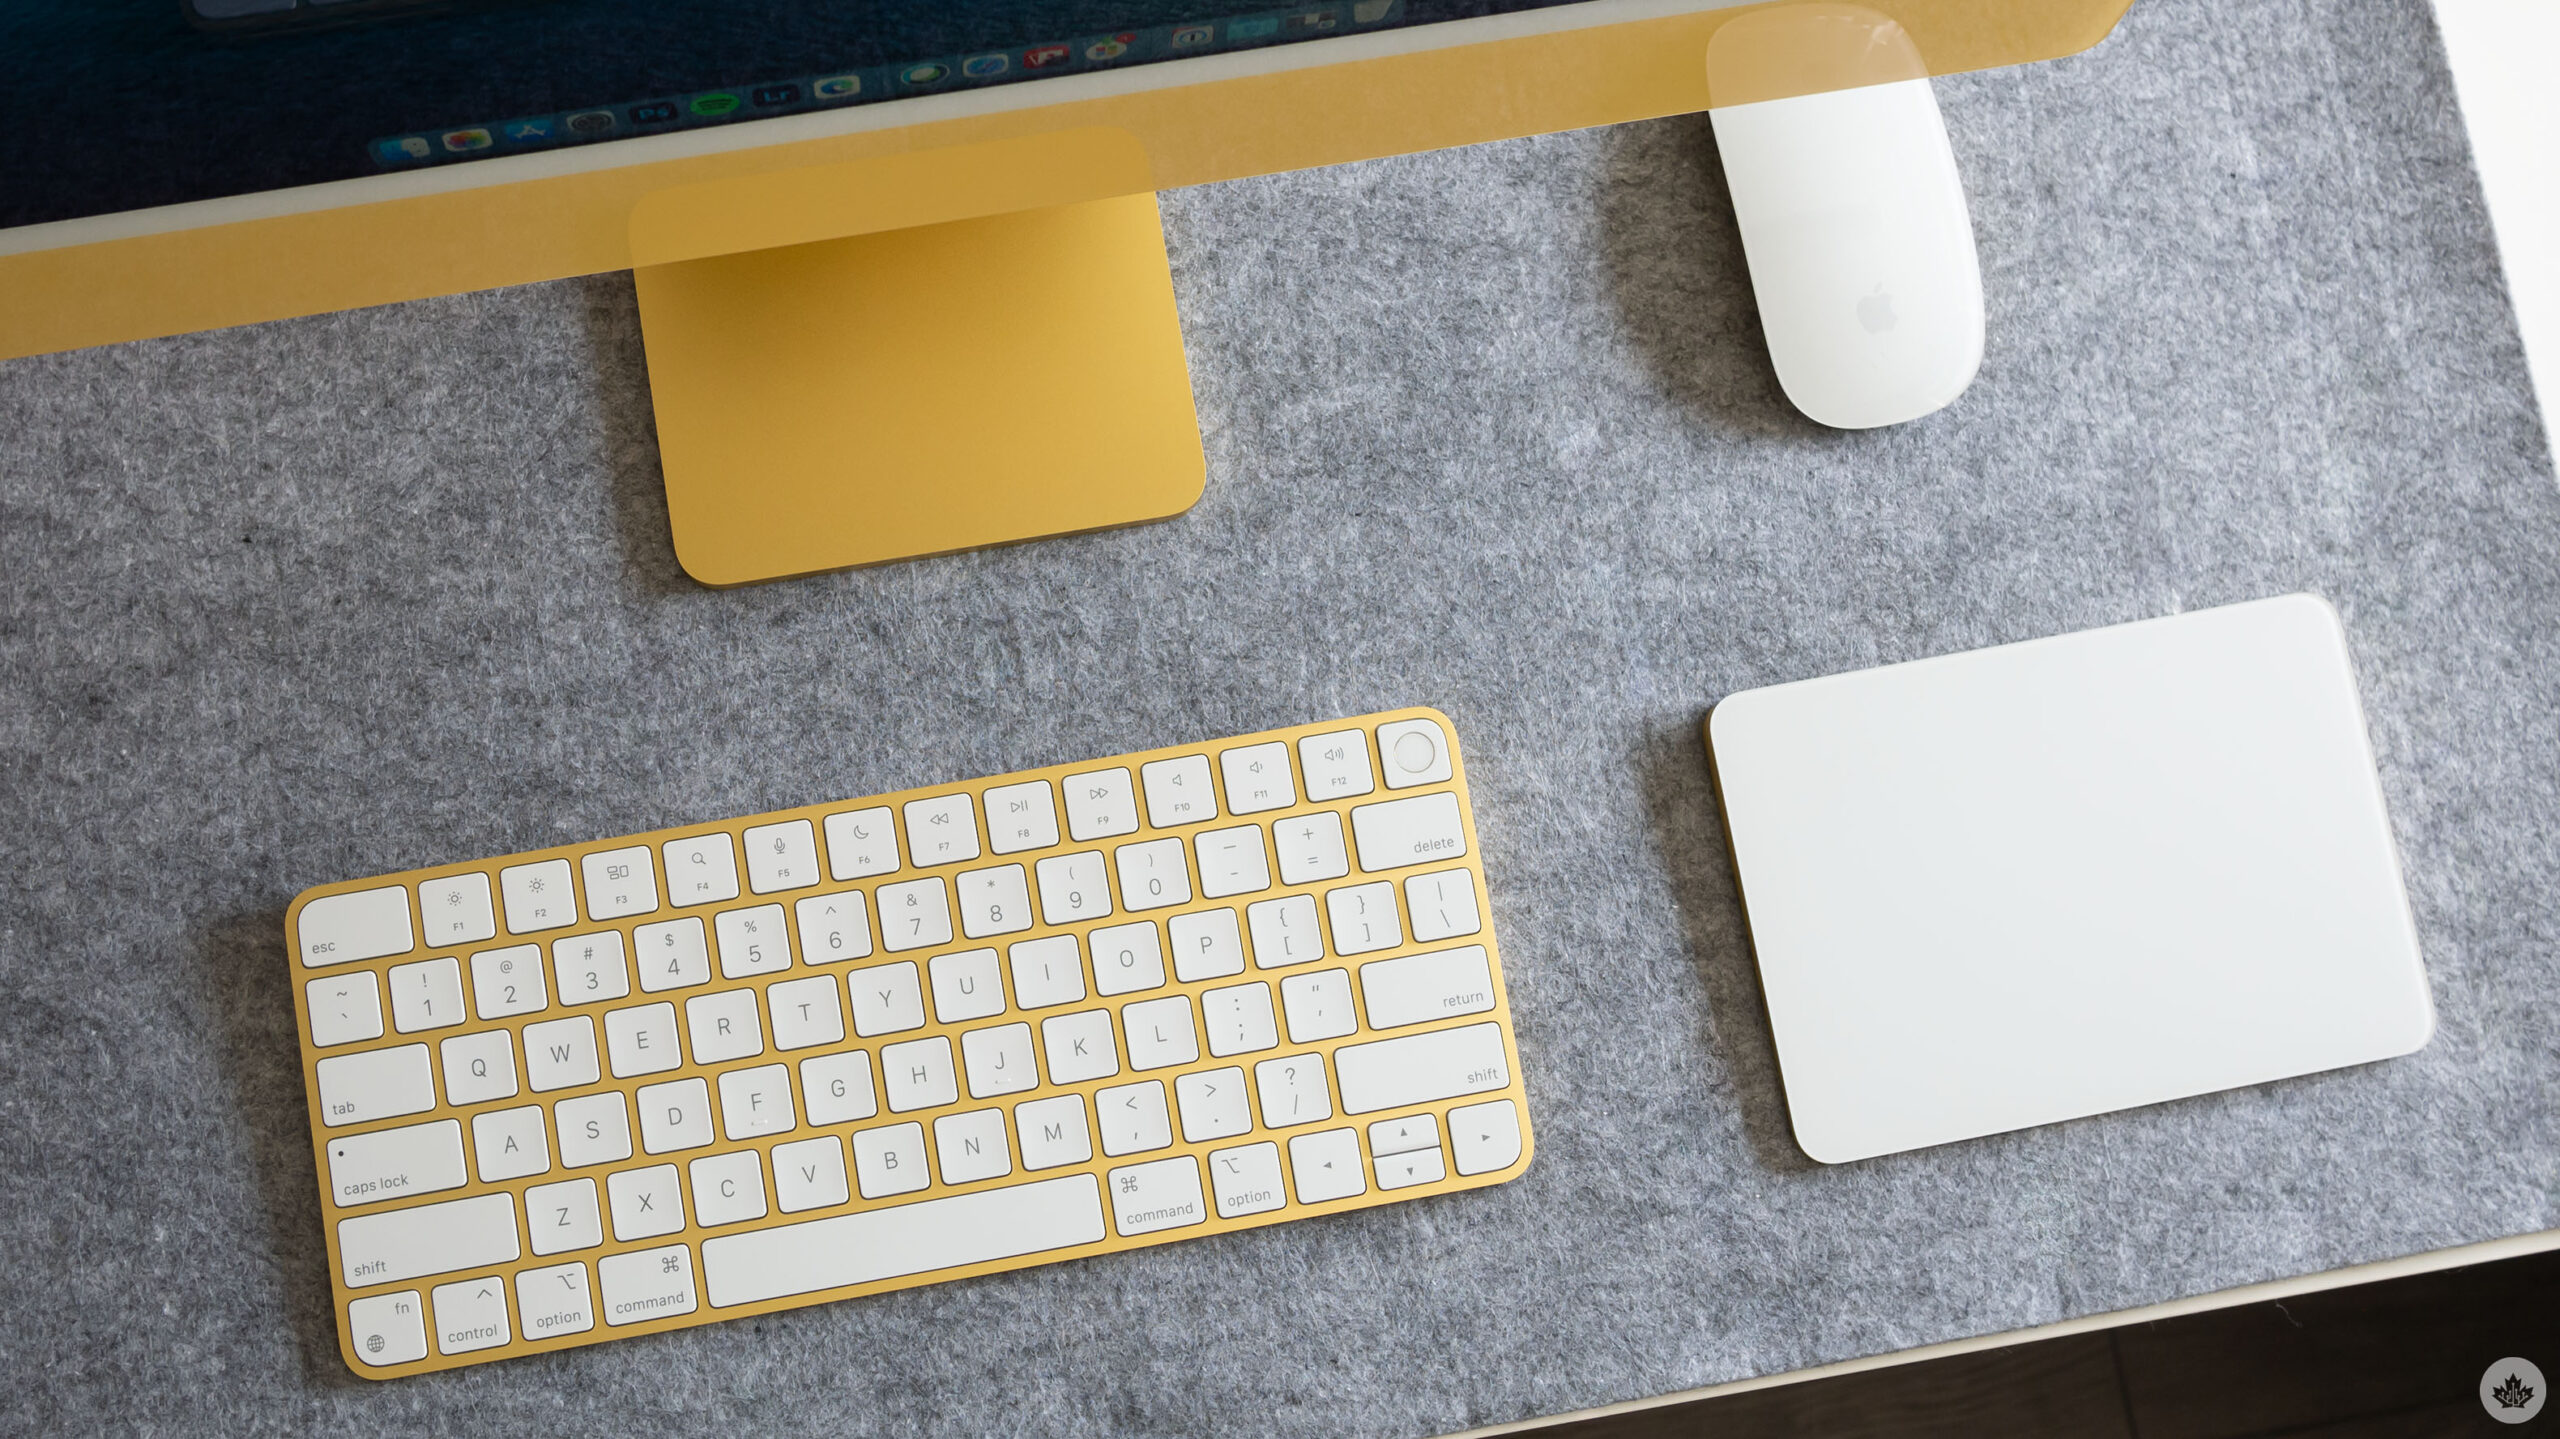 Magic Trackpad vs Magic Mouse: Which one should you get in 2023